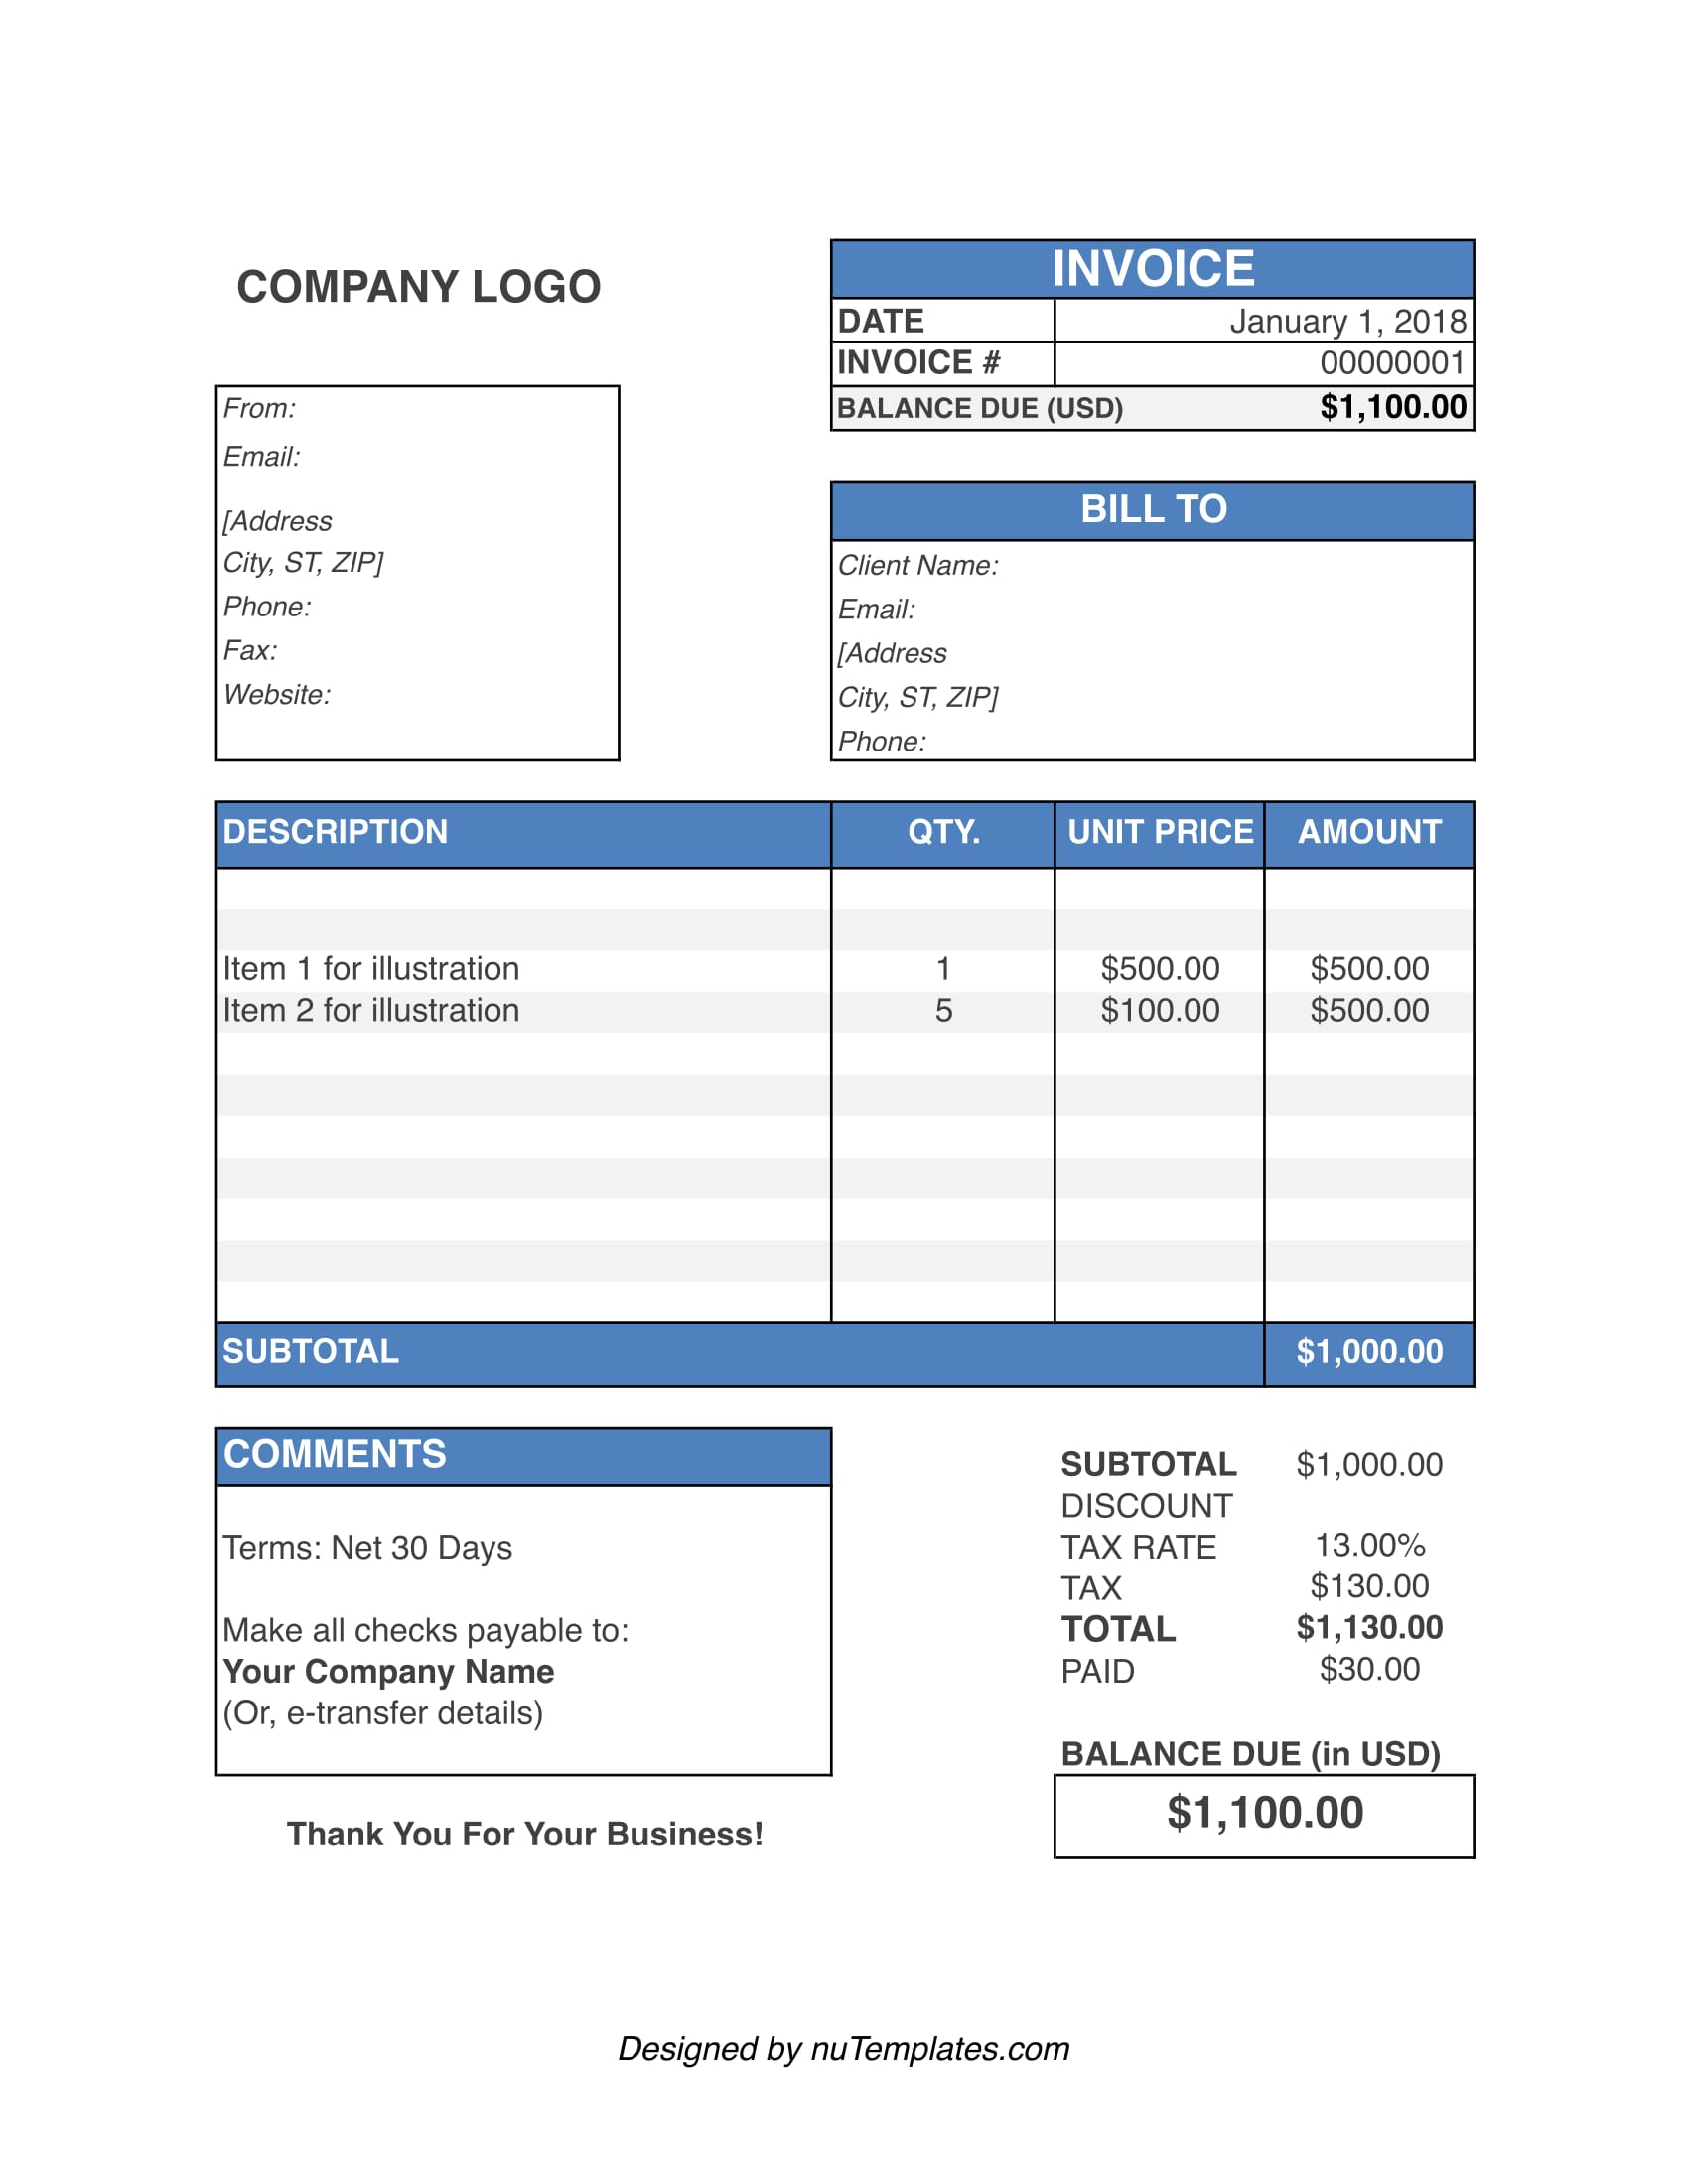 Billing Invoice Template Billing Invoices nuTemplates